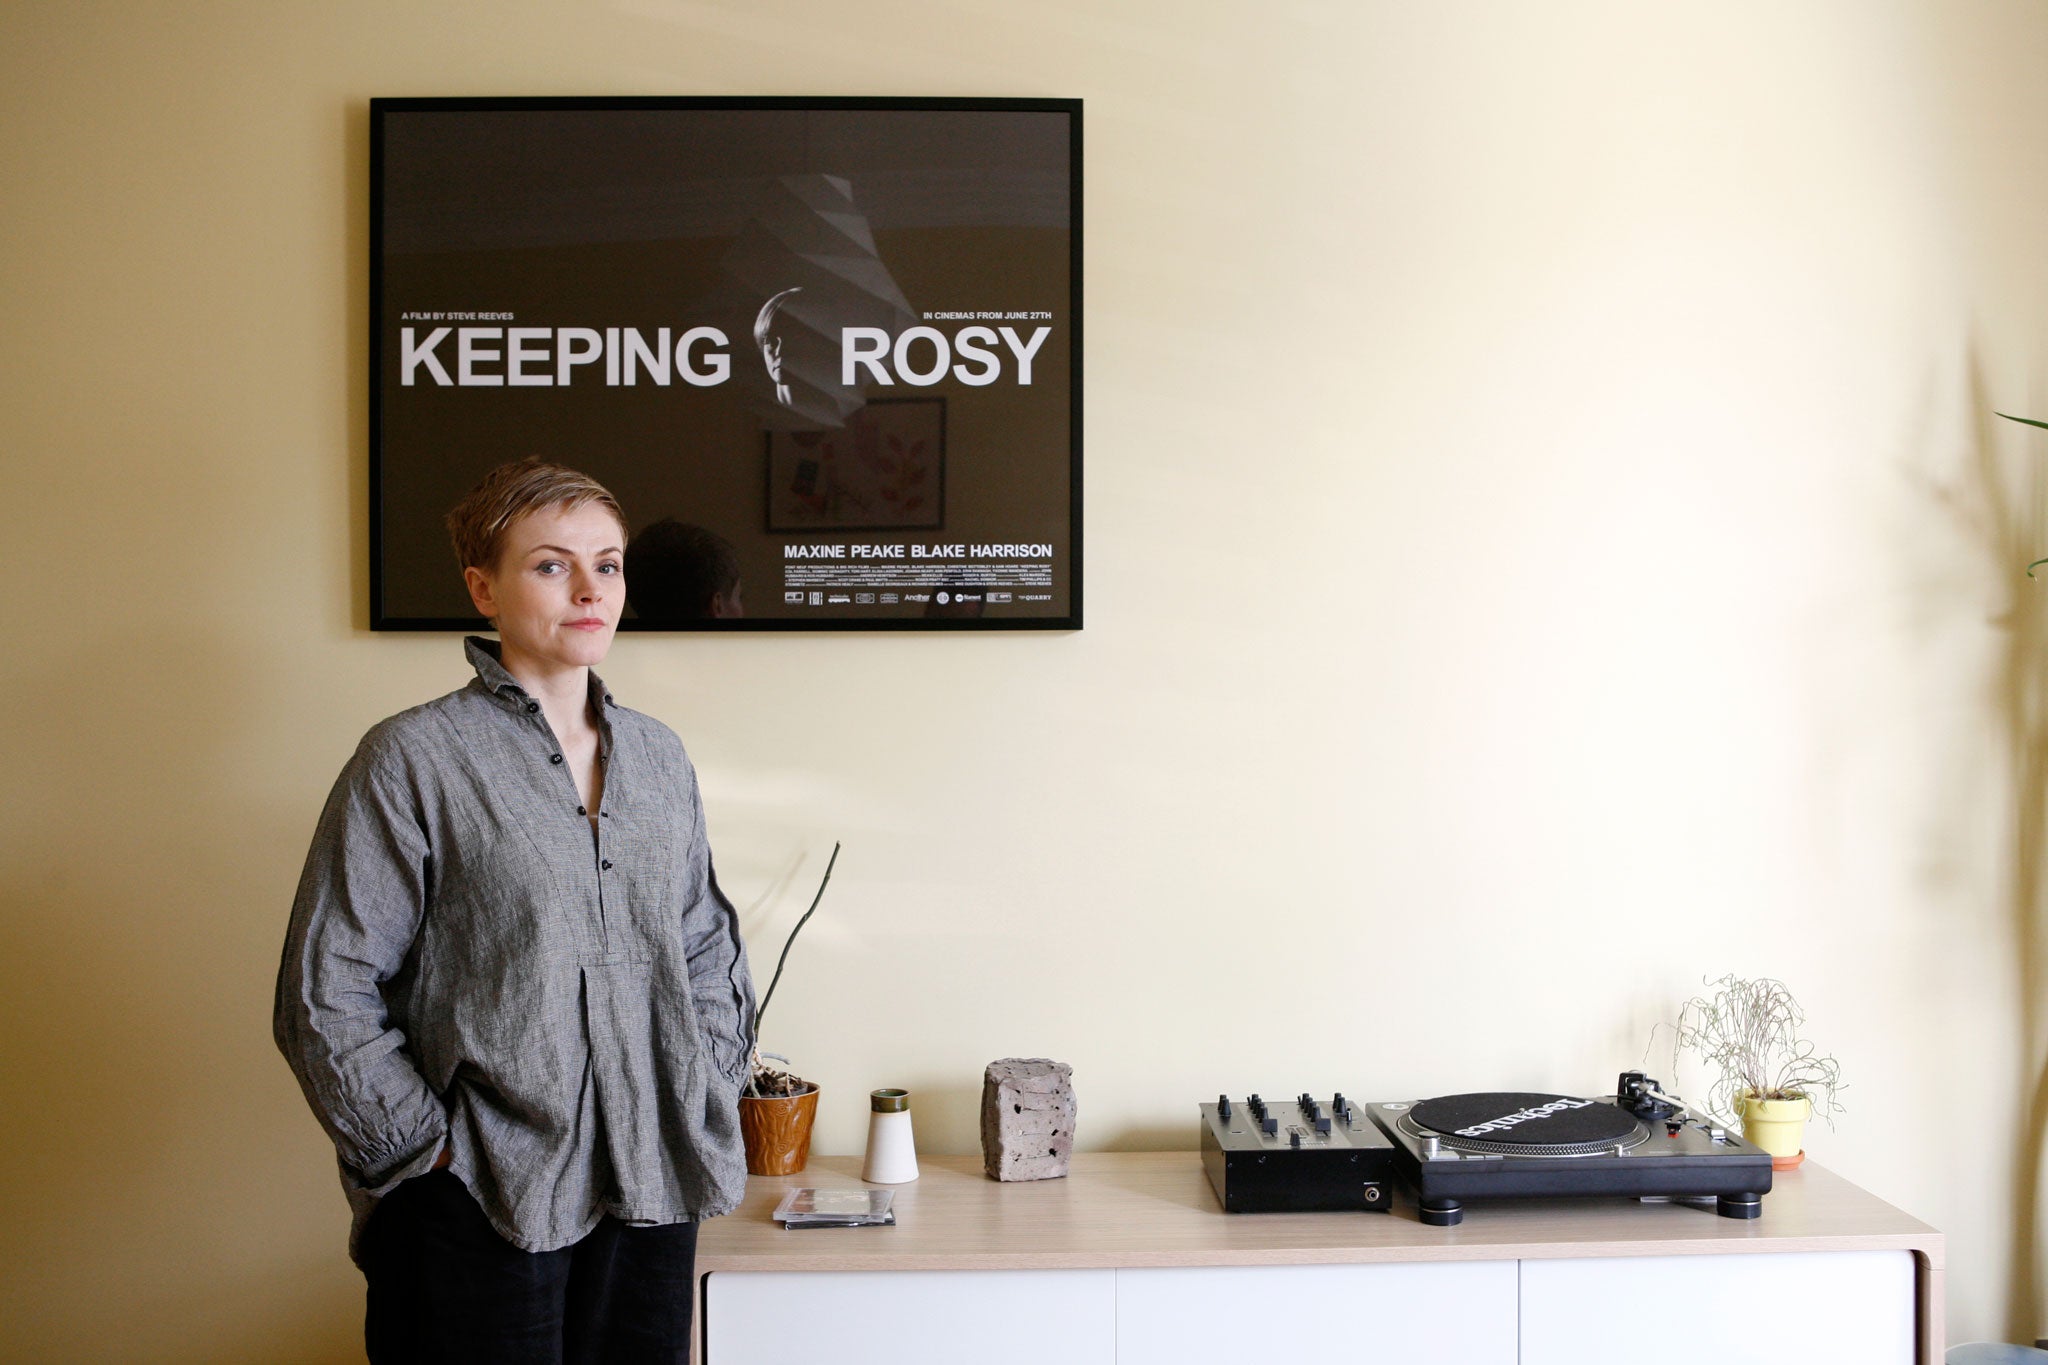 Maxine Peake at home in front of a poster for Keeping Rosy